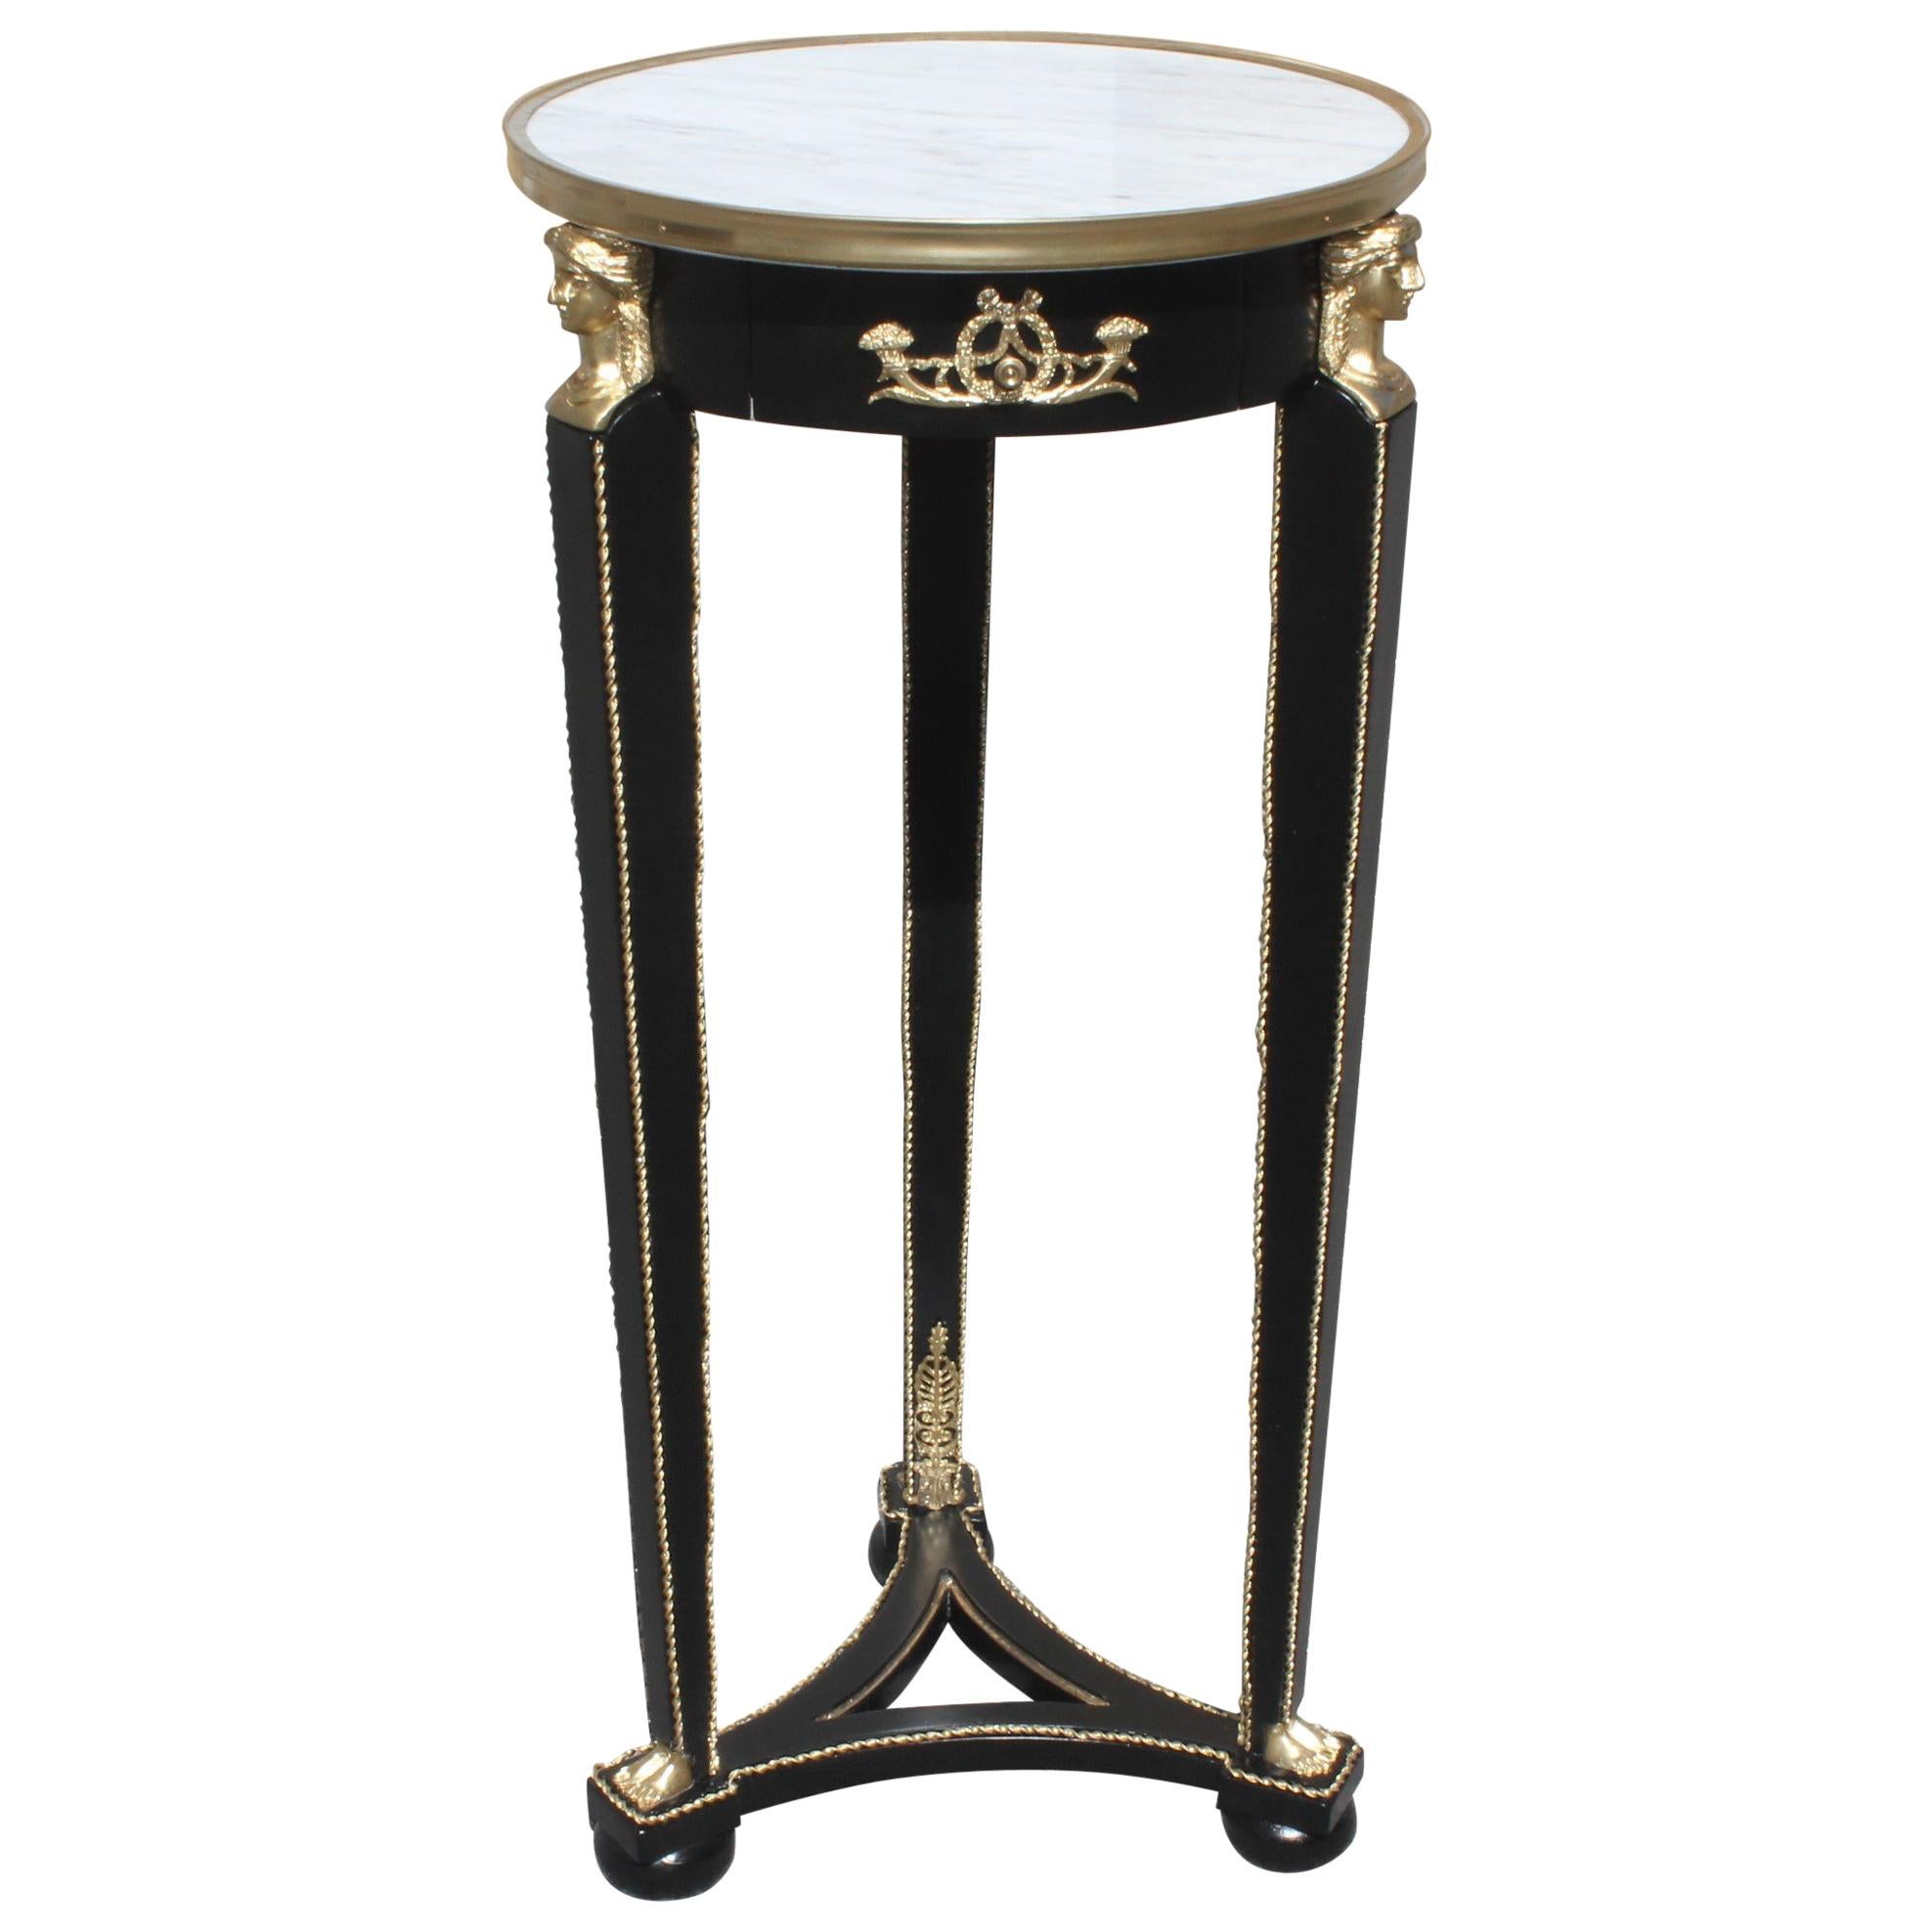 Beautiful French Empire Style Tall Side Table or Pedestal Table Marble Table